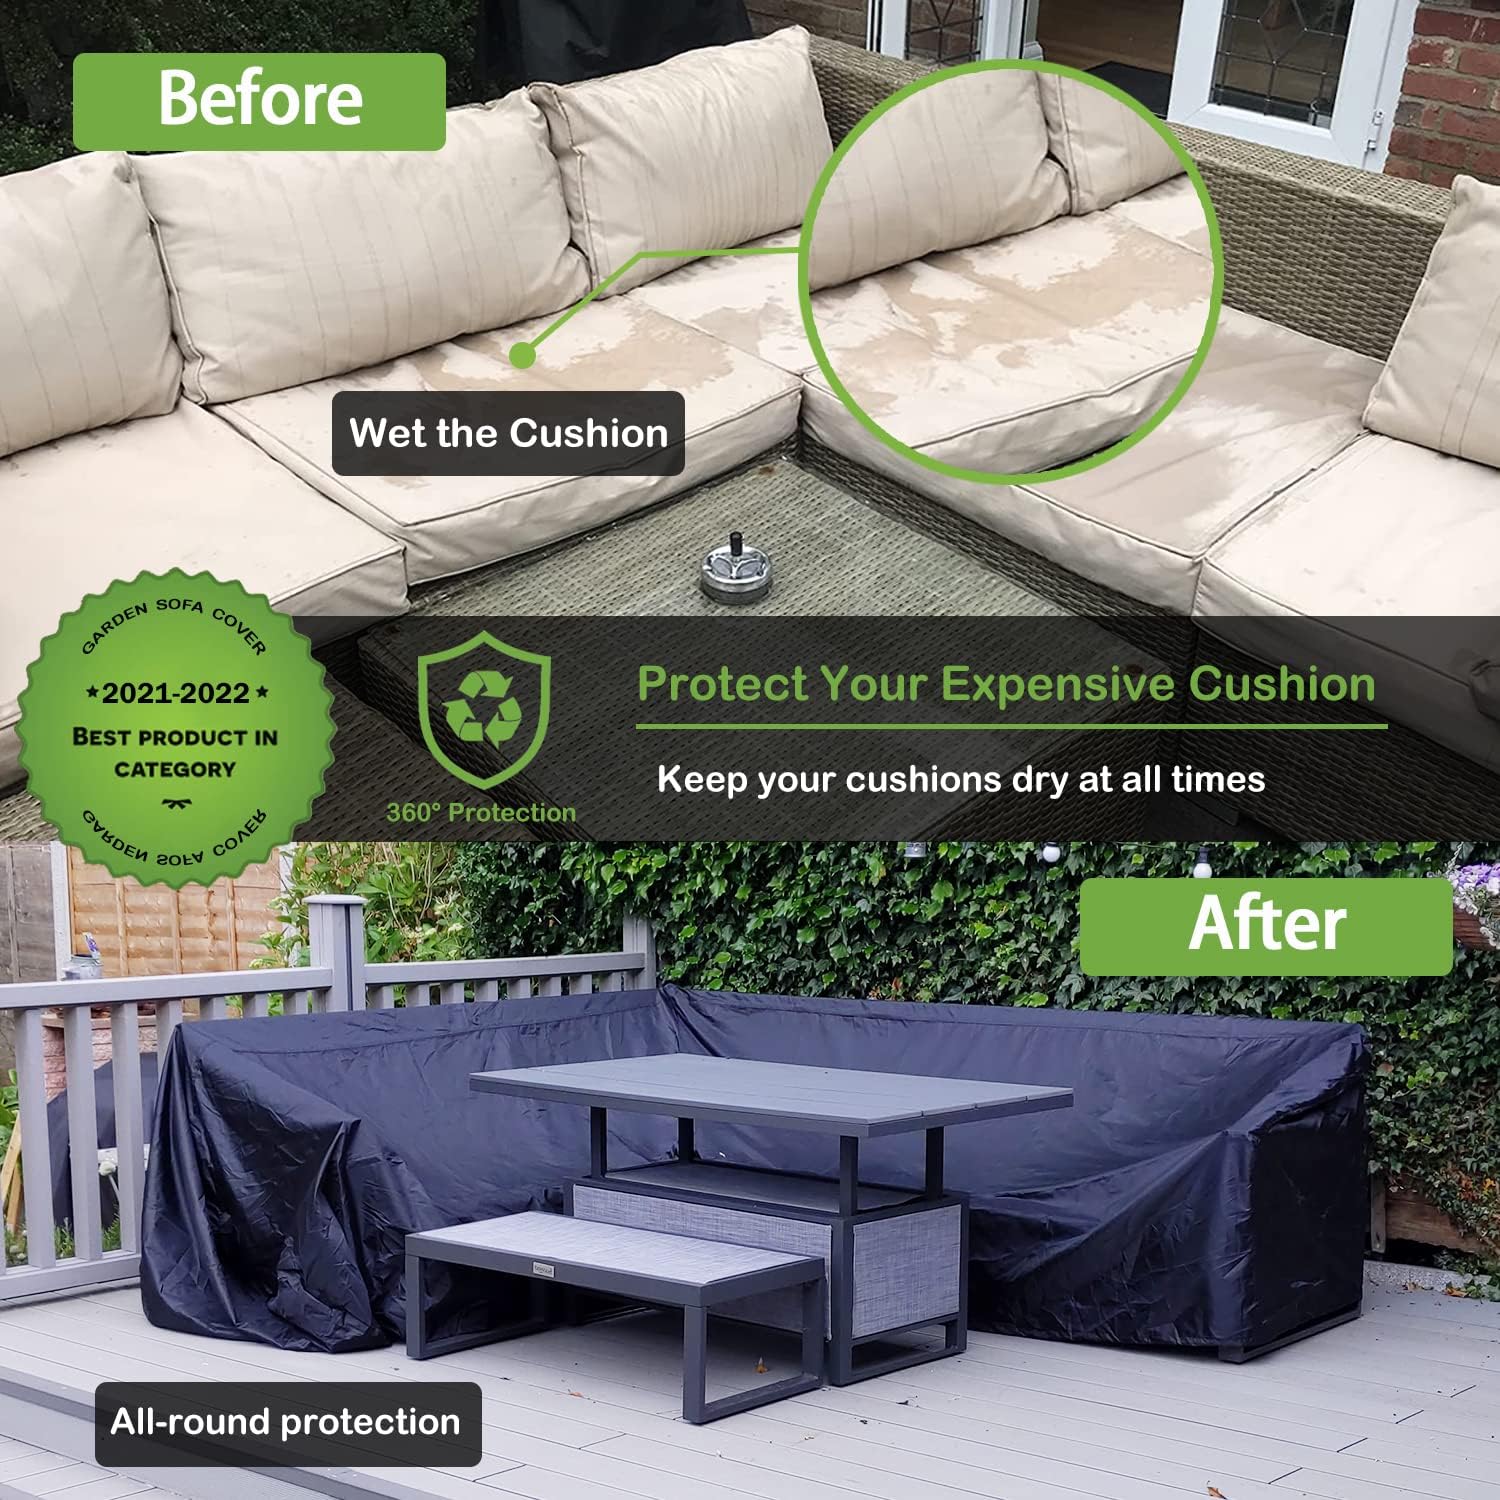 Enzeno Garden L-Shape Furniture Cover Waterproof, 420D Heavy Duty Oxford Fabric Outdoor Rattan Corner Sofa Cover with Waterproof Tape (210Left * 140Right * 75cm)